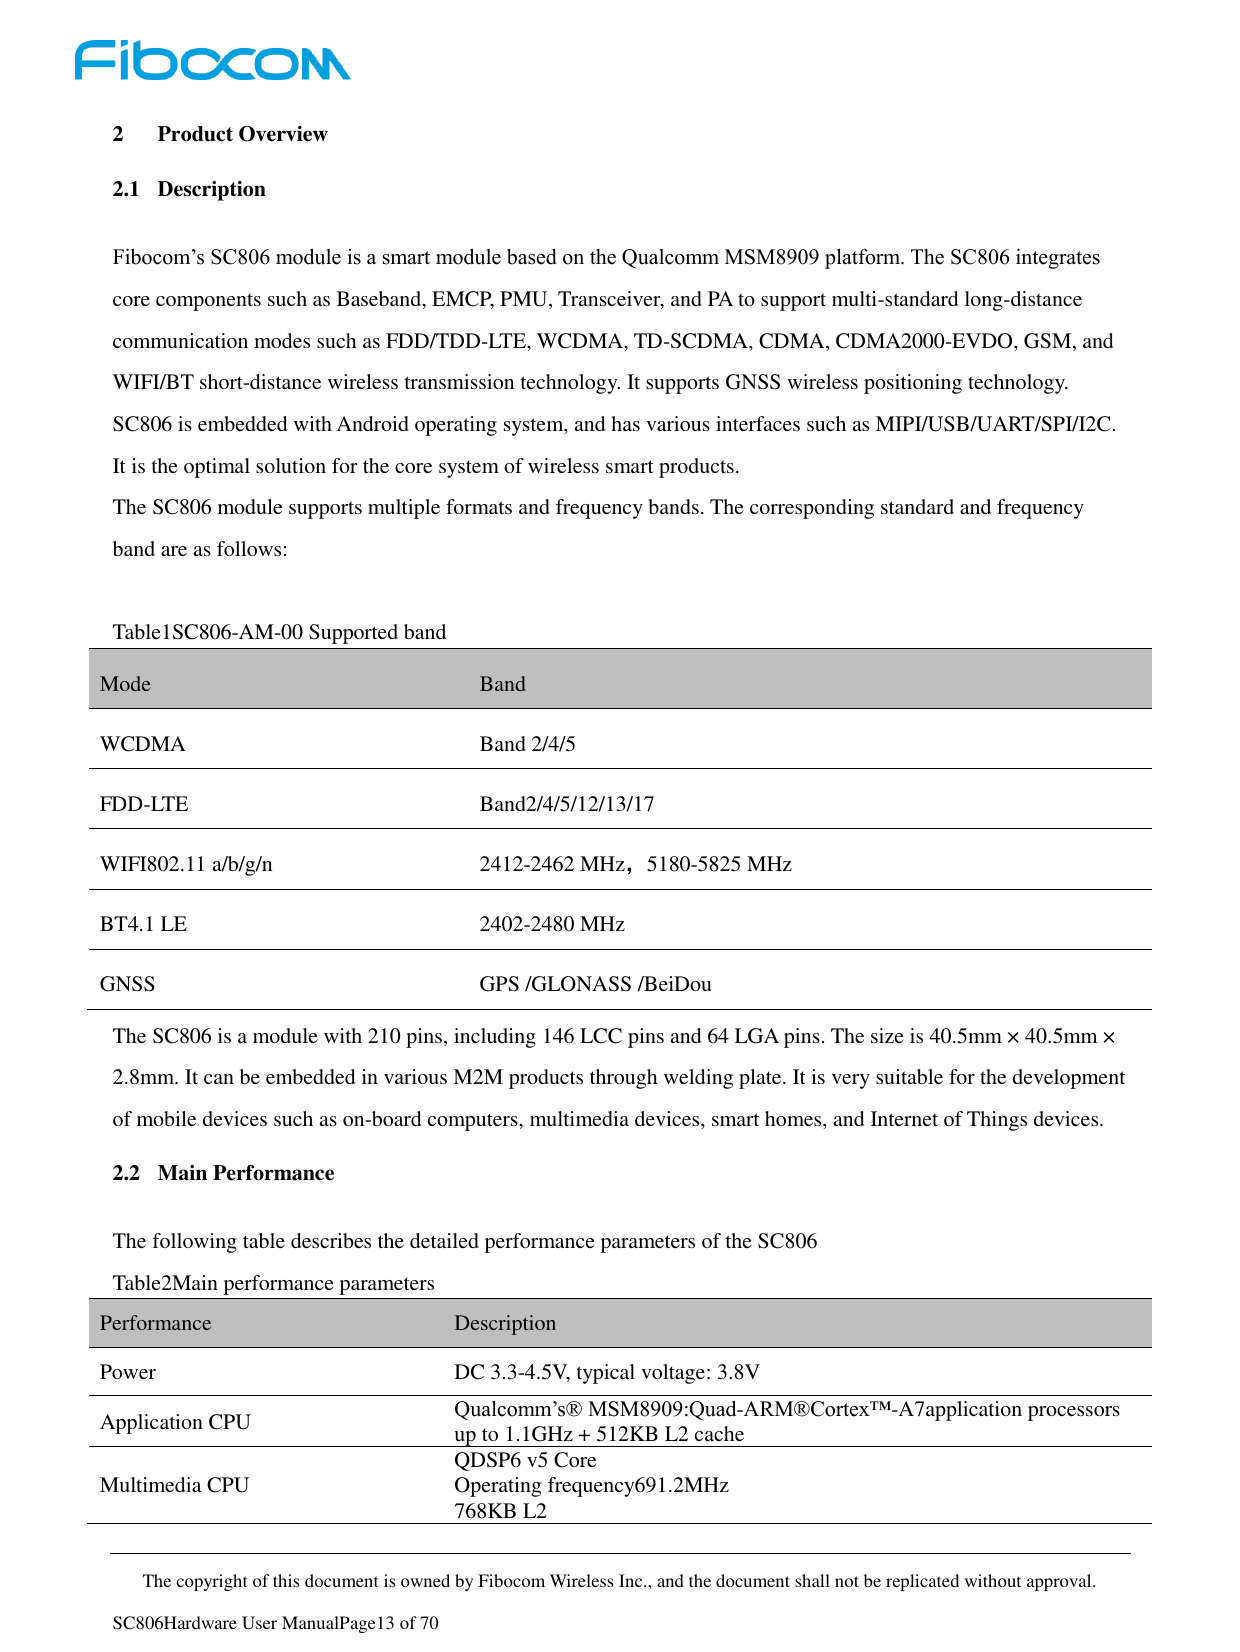     The copyright of this document is owned by Fibocom Wireless Inc., and the document shall not be replicated without approval.   SC806Hardware User ManualPage13 of 70 2 Product Overview 2.1 Description Fibocom’s SC806 module is a smart module based on the Qualcomm MSM8909 platform. The SC806 integrates core components such as Baseband, EMCP, PMU, Transceiver, and PA to support multi-standard long-distance communication modes such as FDD/TDD-LTE, WCDMA, TD-SCDMA, CDMA, CDMA2000-EVDO, GSM, and WIFI/BT short-distance wireless transmission technology. It supports GNSS wireless positioning technology. SC806 is embedded with Android operating system, and has various interfaces such as MIPI/USB/UART/SPI/I2C. It is the optimal solution for the core system of wireless smart products. The SC806 module supports multiple formats and frequency bands. The corresponding standard and frequency band are as follows:  Table1SC806-AM-00 Supported band Mode Band   WCDMA Band 2/4/5 FDD-LTE Band2/4/5/12/13/17 WIFI802.11 a/b/g/n 2412-2462 MHz，5180-5825 MHz BT4.1 LE 2402-2480 MHz GNSS GPS /GLONASS /BeiDou The SC806 is a module with 210 pins, including 146 LCC pins and 64 LGA pins. The size is 40.5mm × 40.5mm × 2.8mm. It can be embedded in various M2M products through welding plate. It is very suitable for the development of mobile devices such as on-board computers, multimedia devices, smart homes, and Internet of Things devices. 2.2 Main Performance The following table describes the detailed performance parameters of the SC806 Table2Main performance parameters Performance Description Power DC 3.3-4.5V, typical voltage: 3.8V Application CPU Qualcomm’s® MSM8909:Quad-ARM®Cortex™-A7application processors up to 1.1GHz + 512KB L2 cache Multimedia CPU QDSP6 v5 Core Operating frequency691.2MHz 768KB L2 